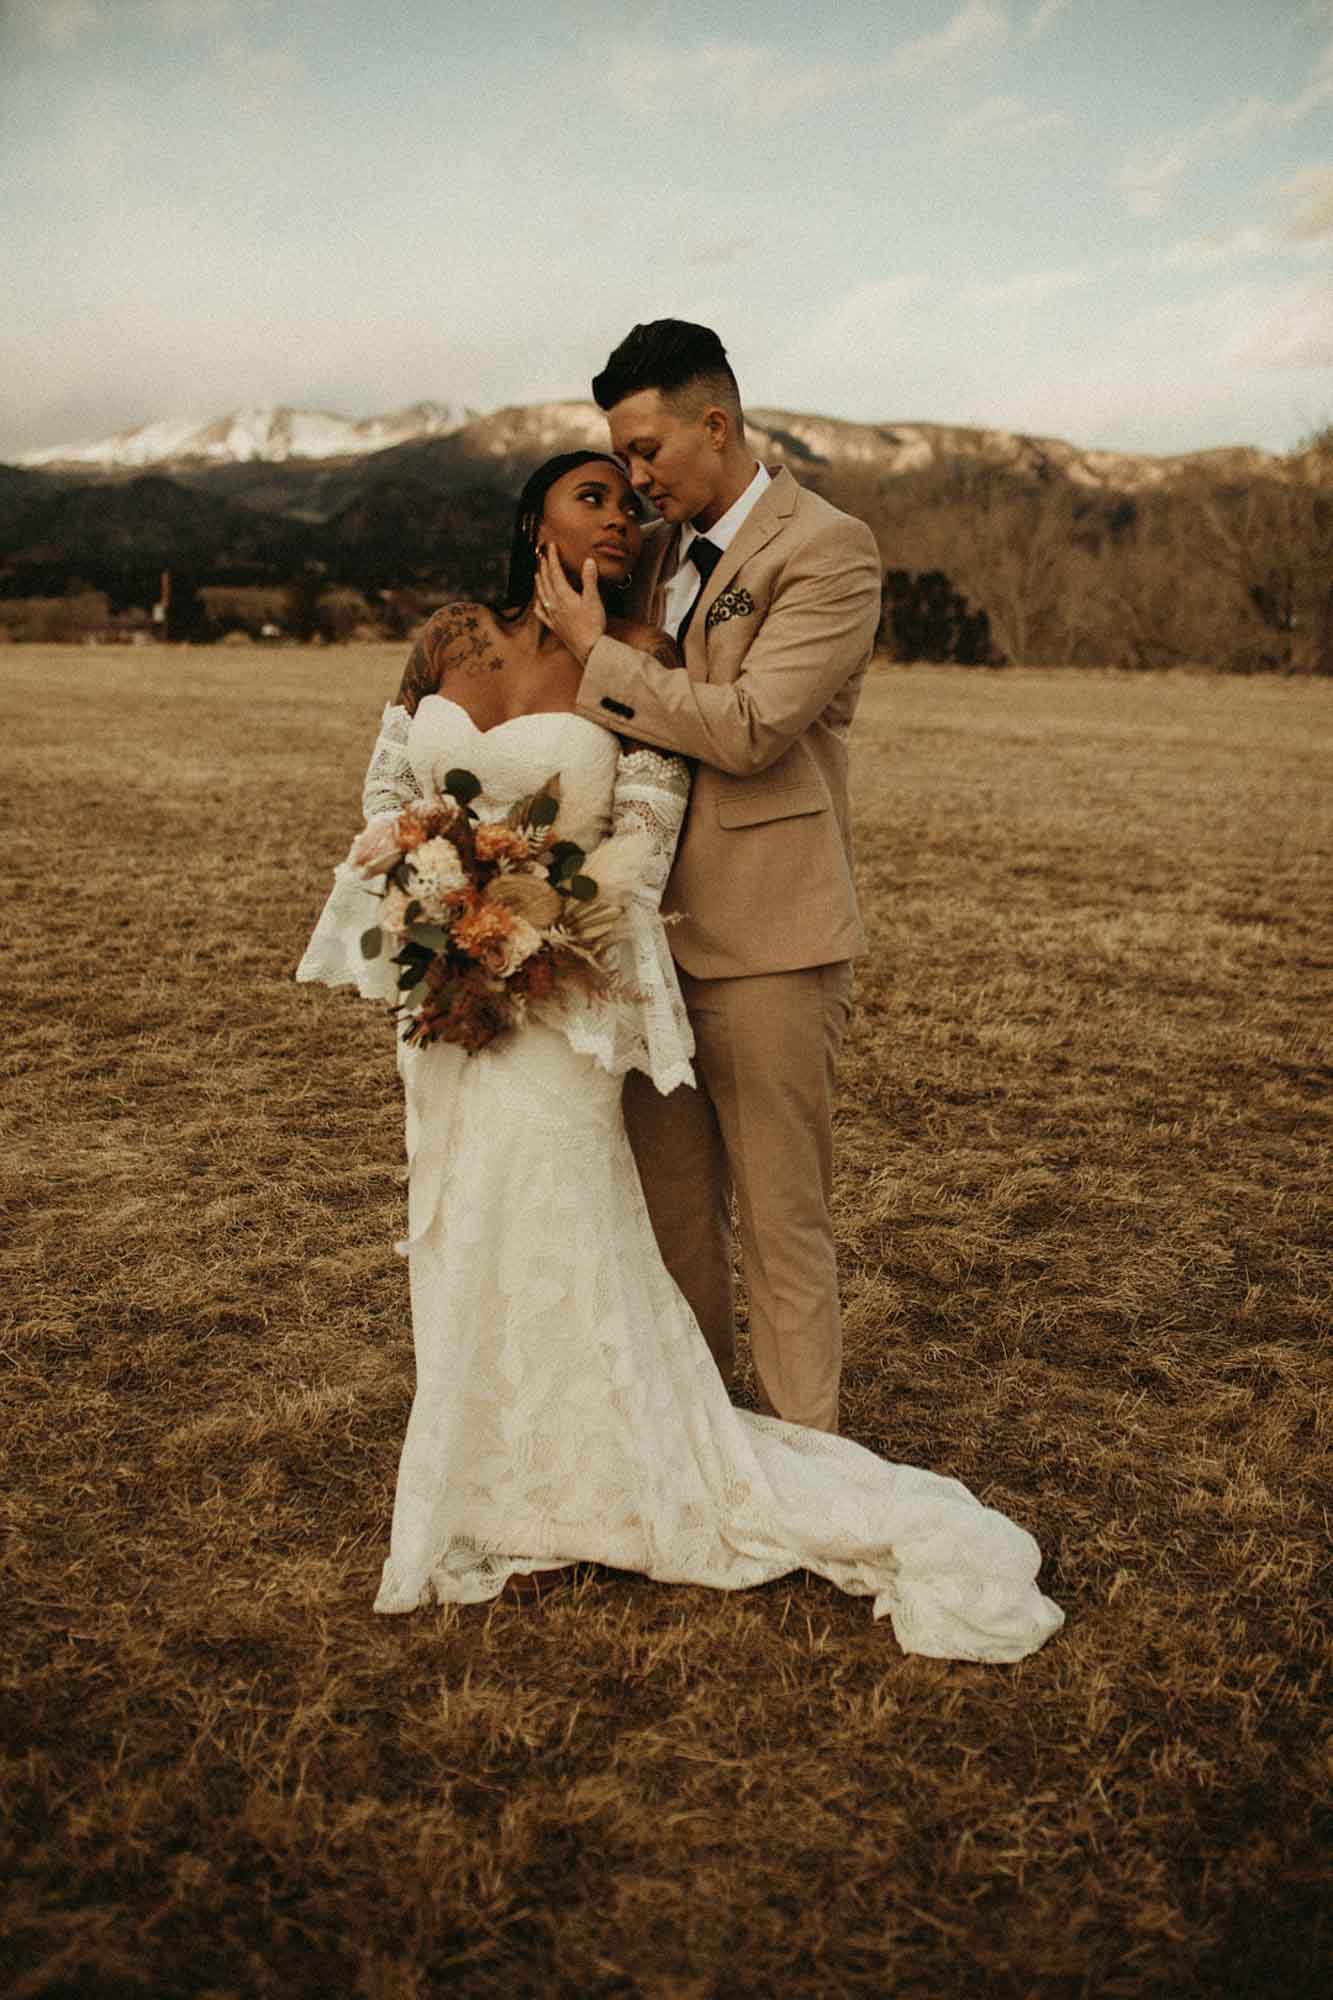 Elegant Colorado vow renewal with wild florals | McKenzie Bigliazzi Photography | Featured on Equally Wed, the leading LGBTQ+ wedding magazine